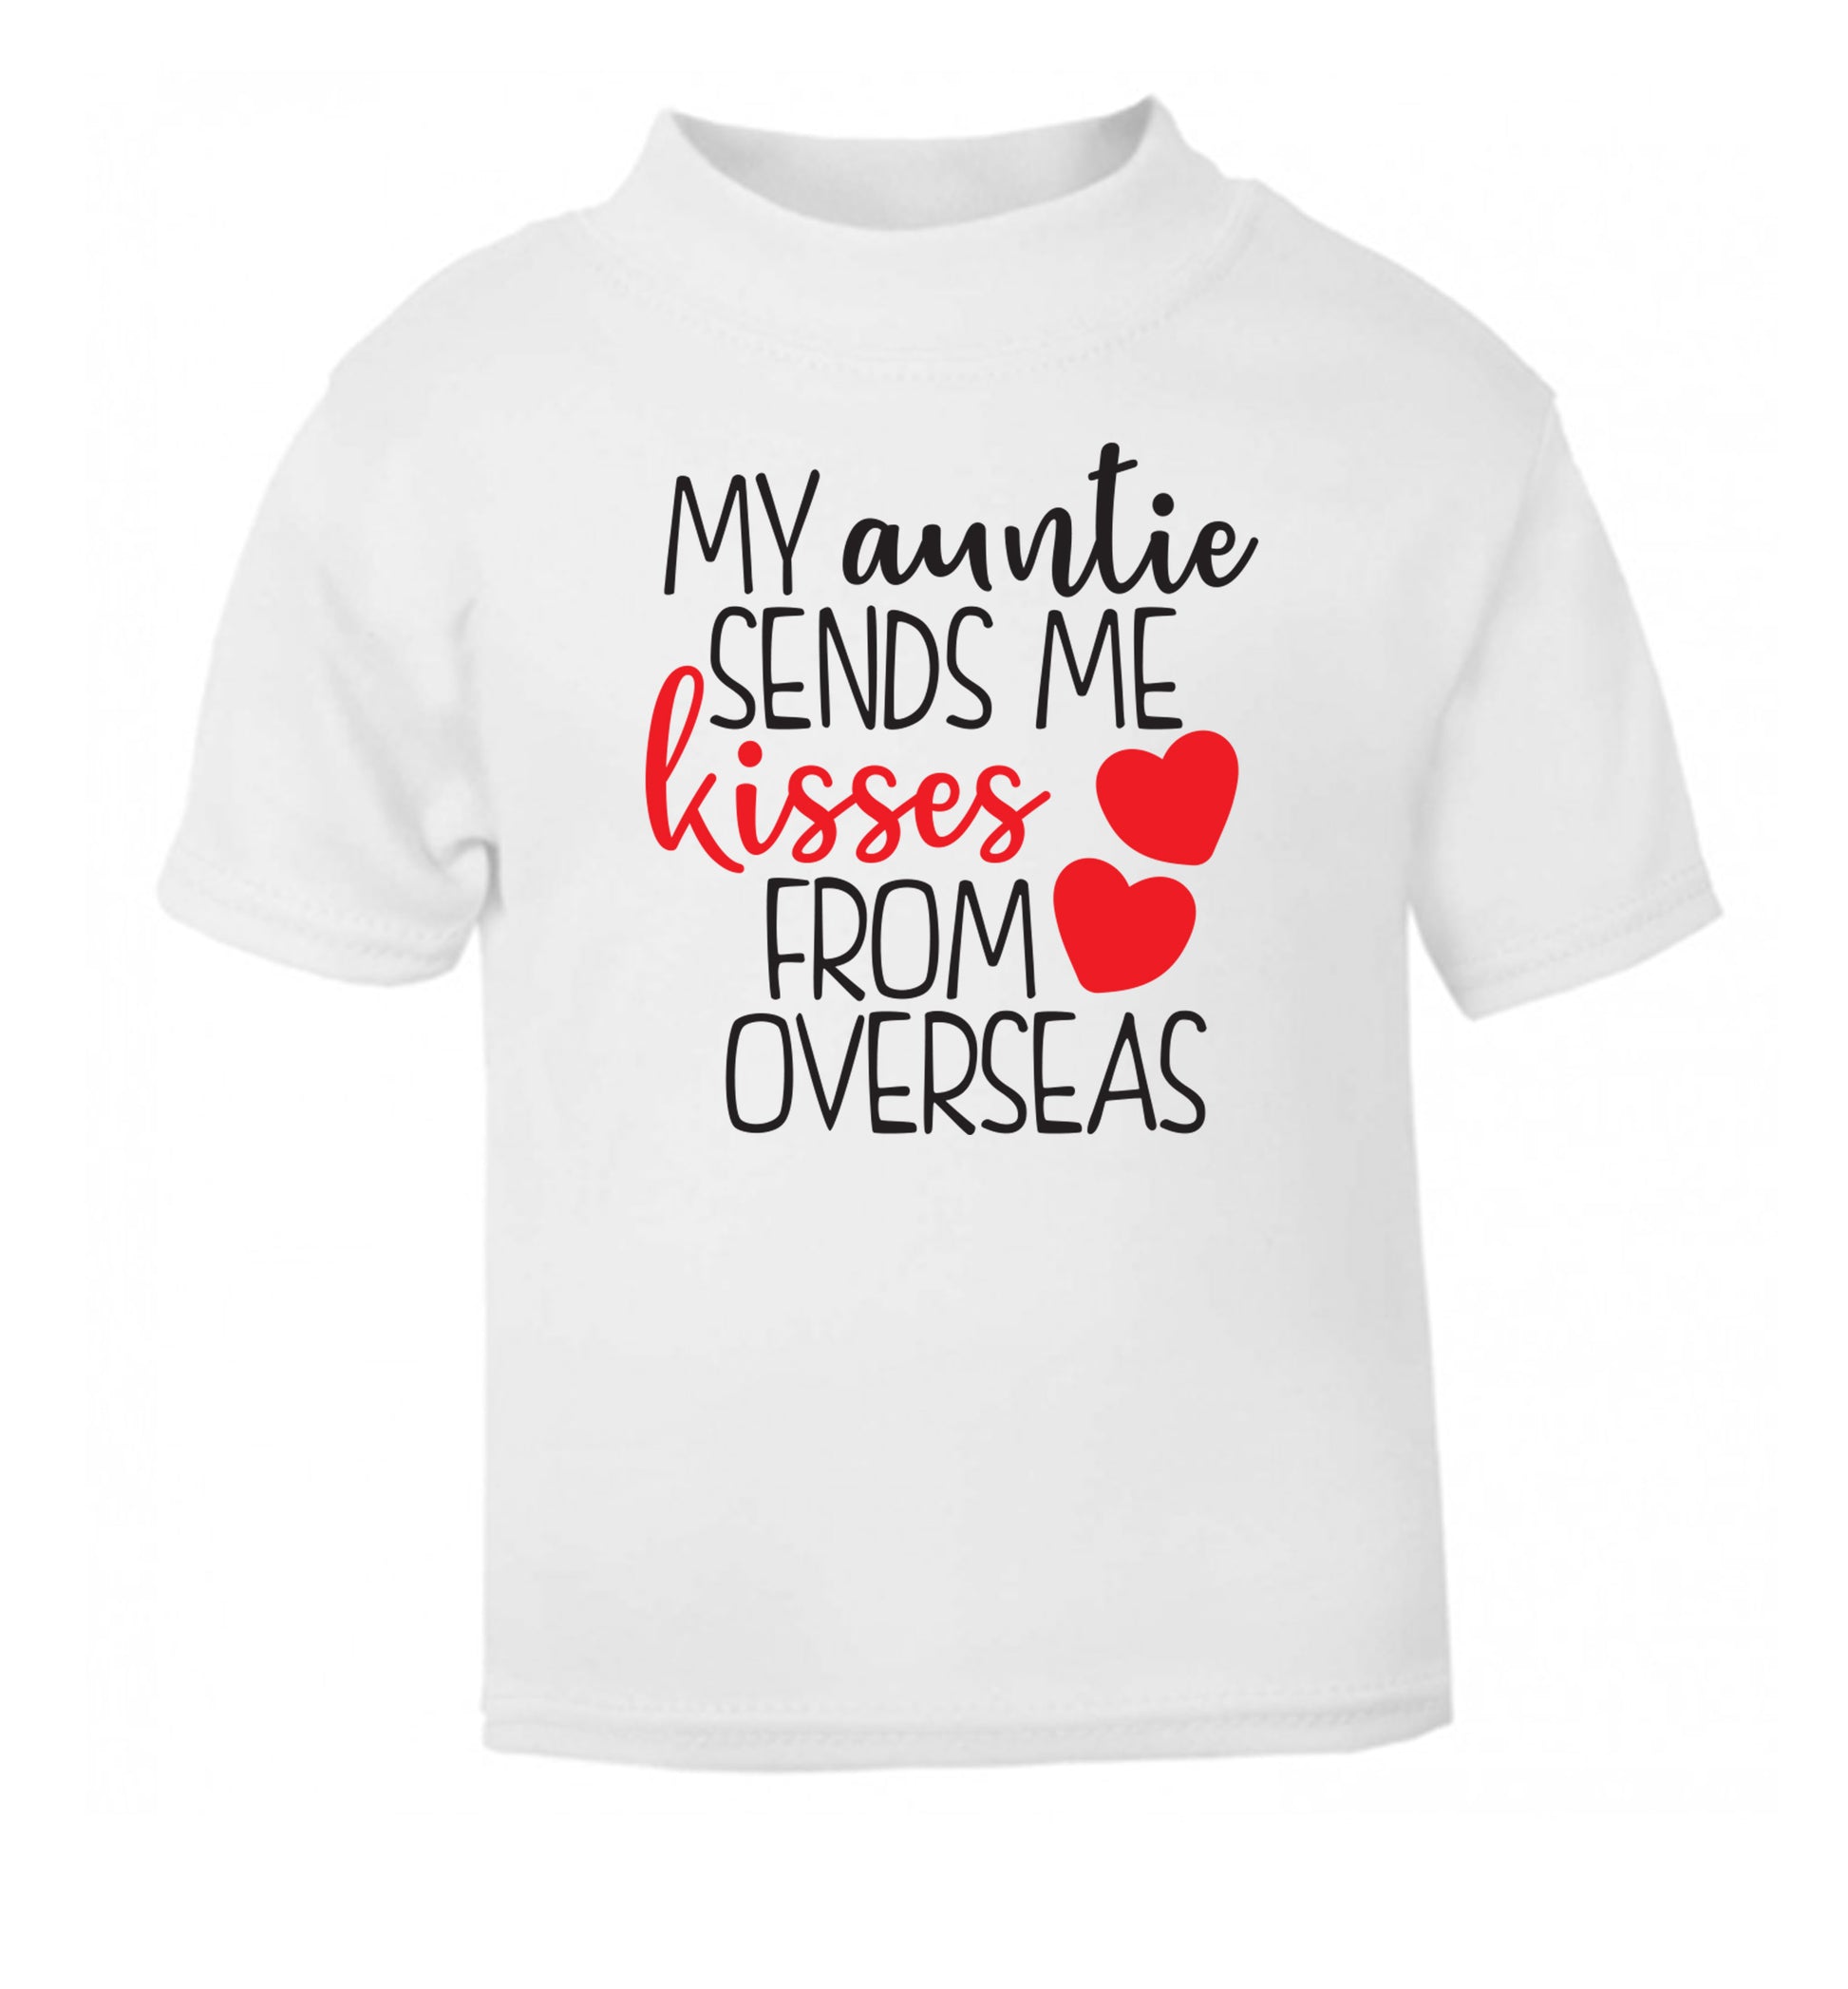 My auntie sends me kisses from overseas white Baby Toddler Tshirt 2 Years